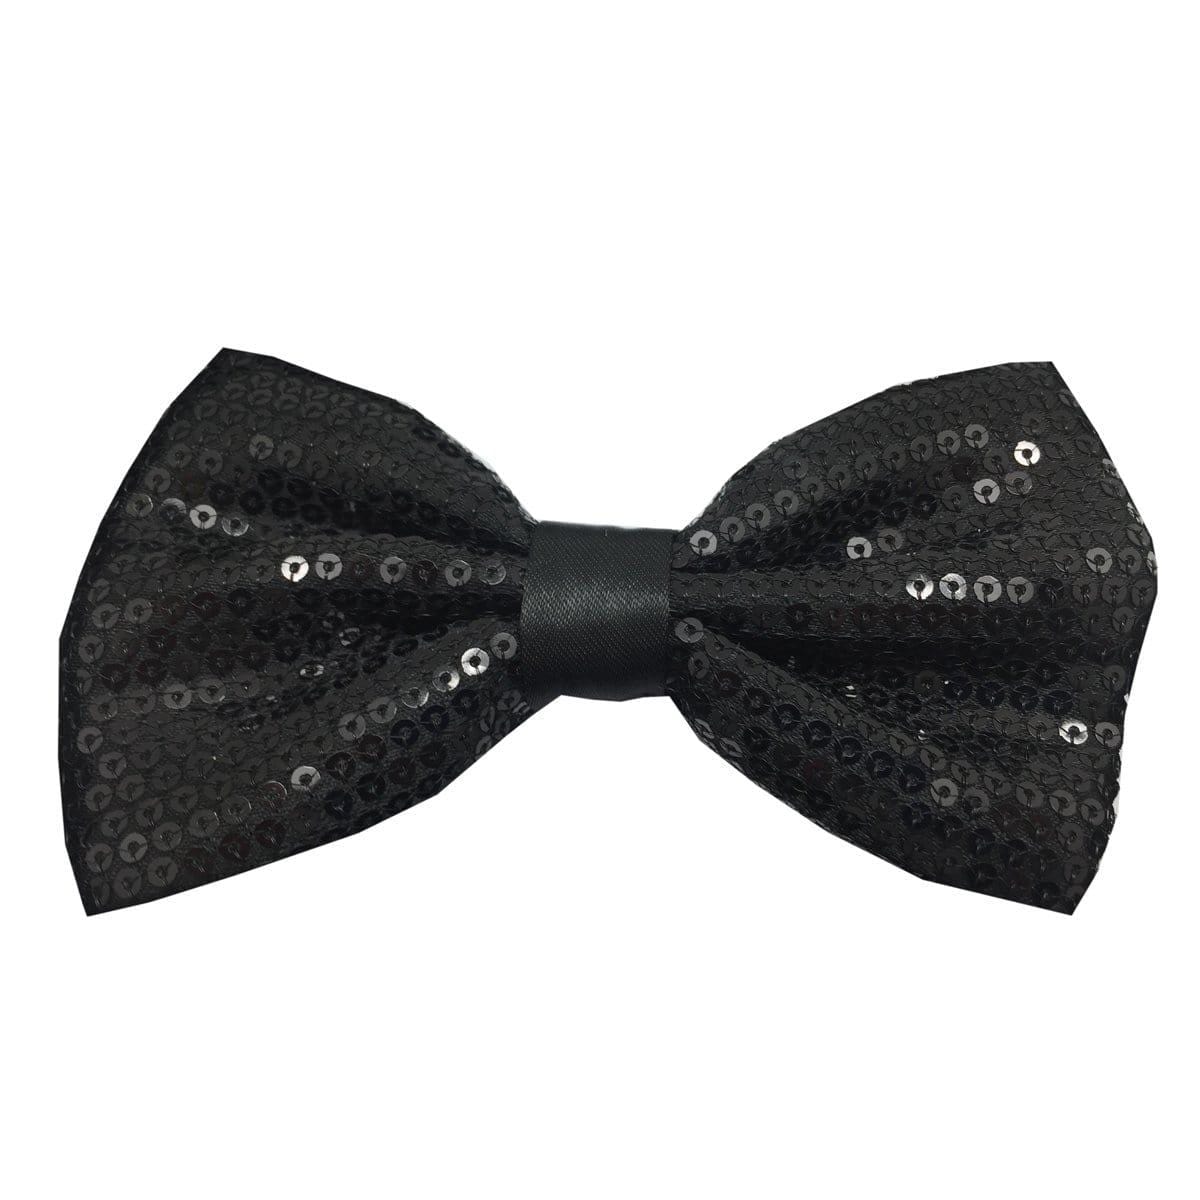 Buy Costume Accessories Black sequin bow tie sold at Party Expert